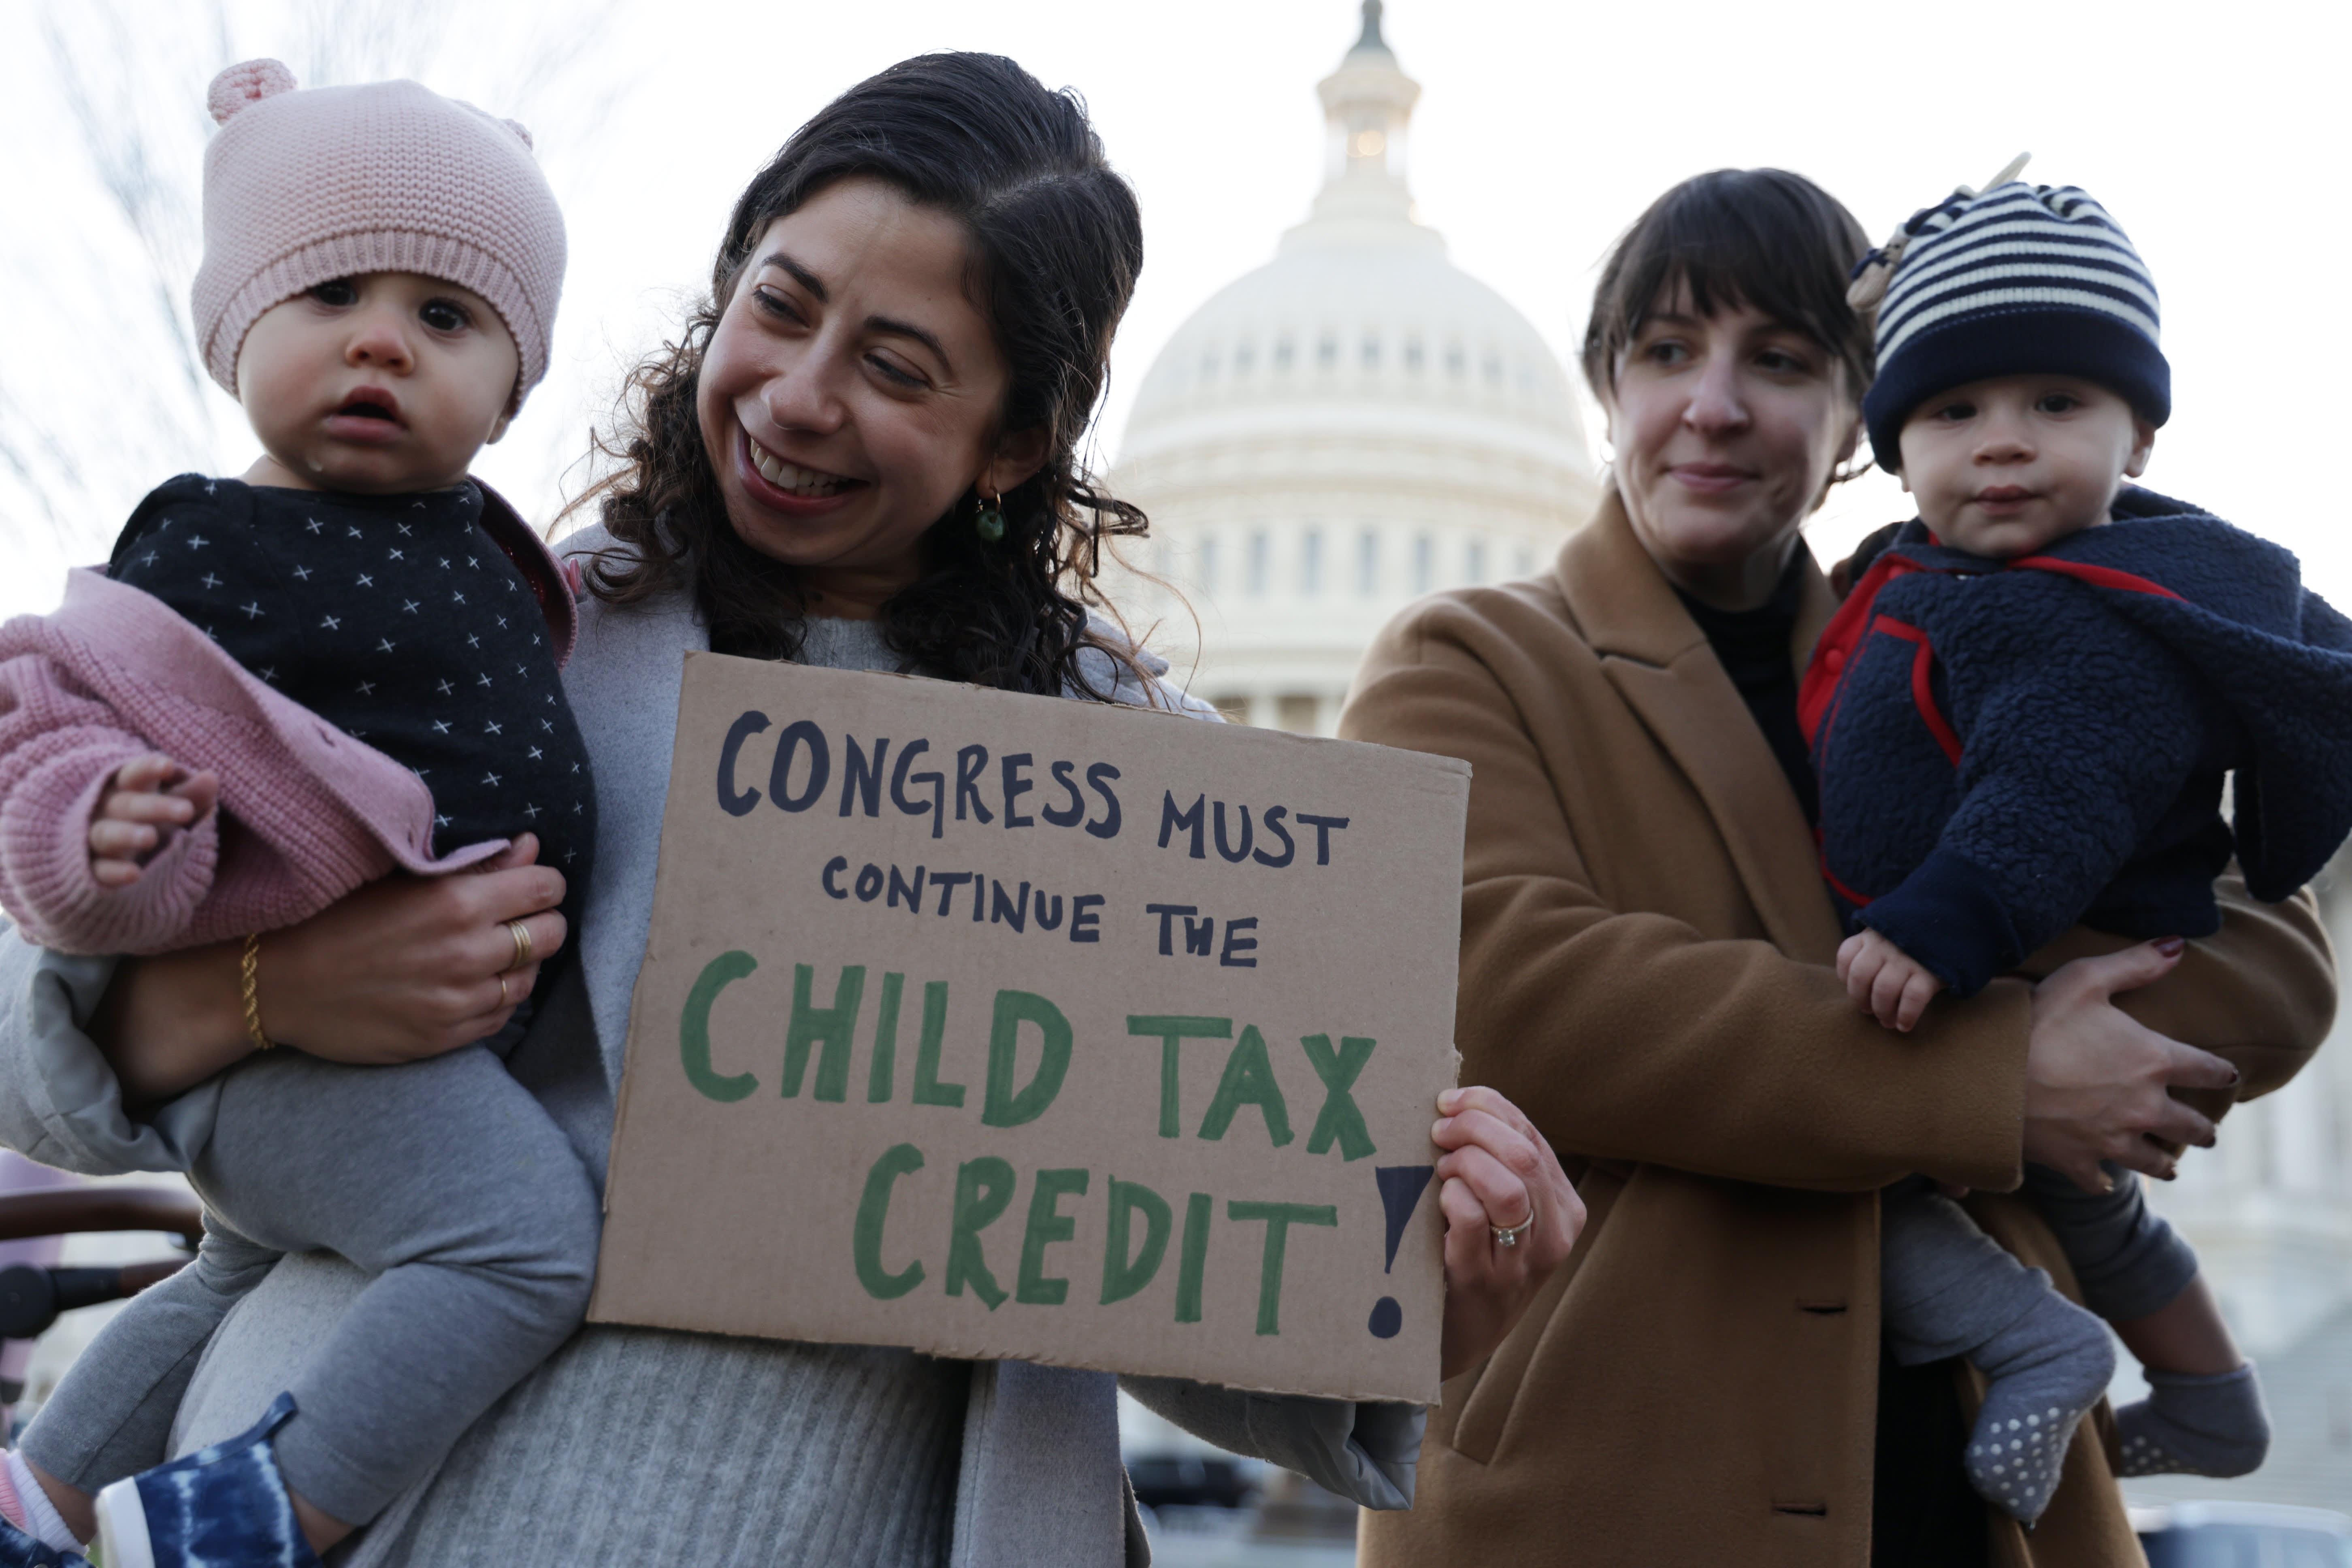 Monthly child tax credit payments are ending – these grandmas in Congress want to extend them – CNBC